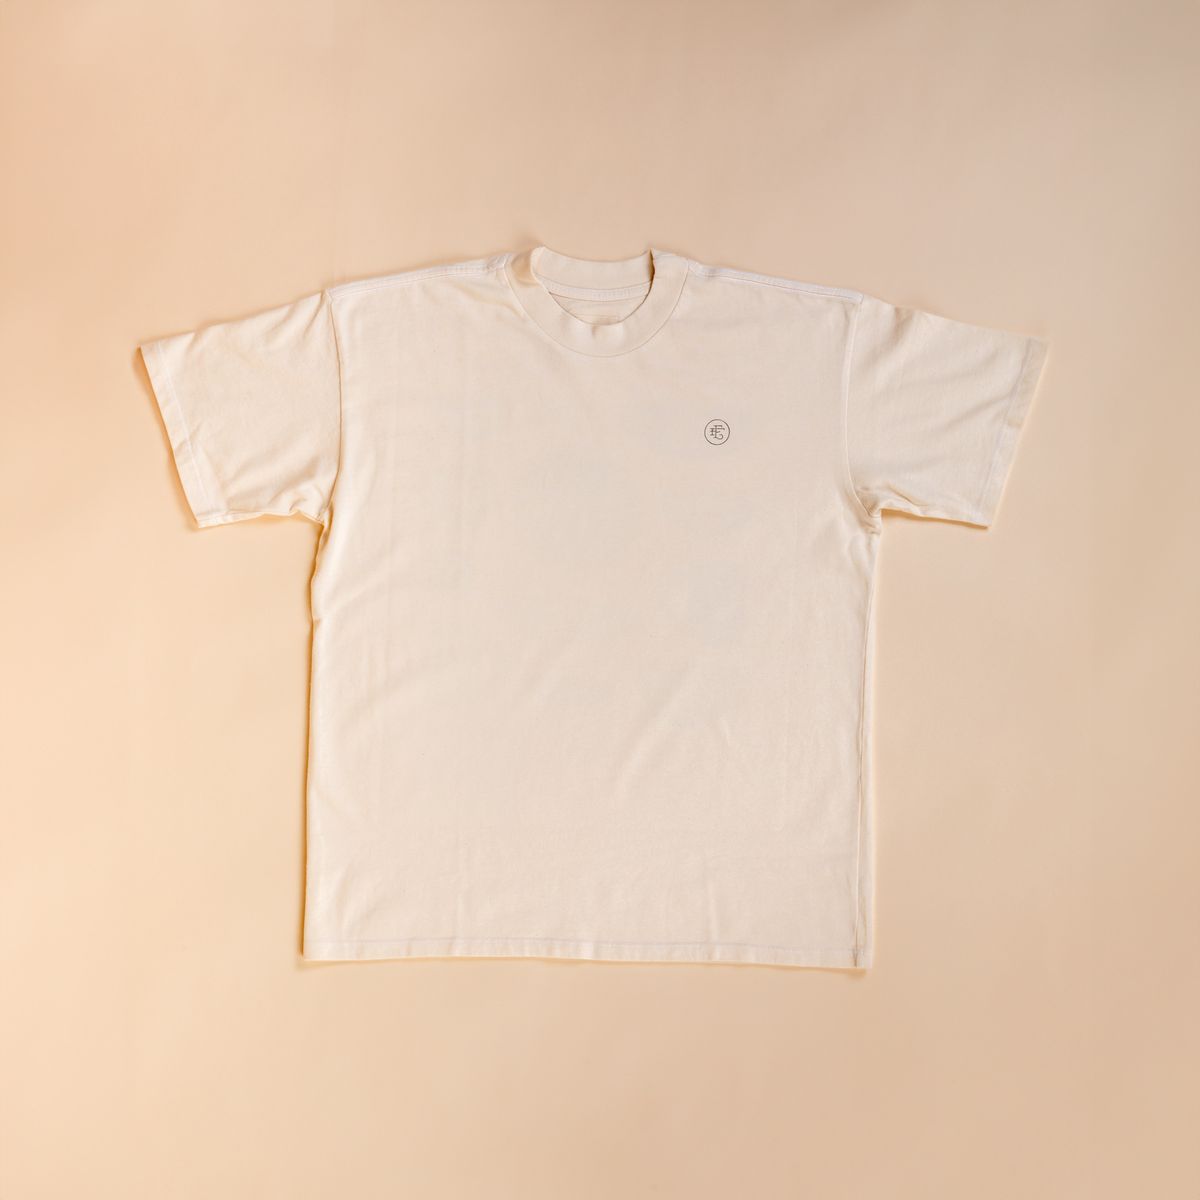 Flat lay t-shirt in cream against a cream background.  On the top right corner of the tee is a little 'East Fork' EF Logo.